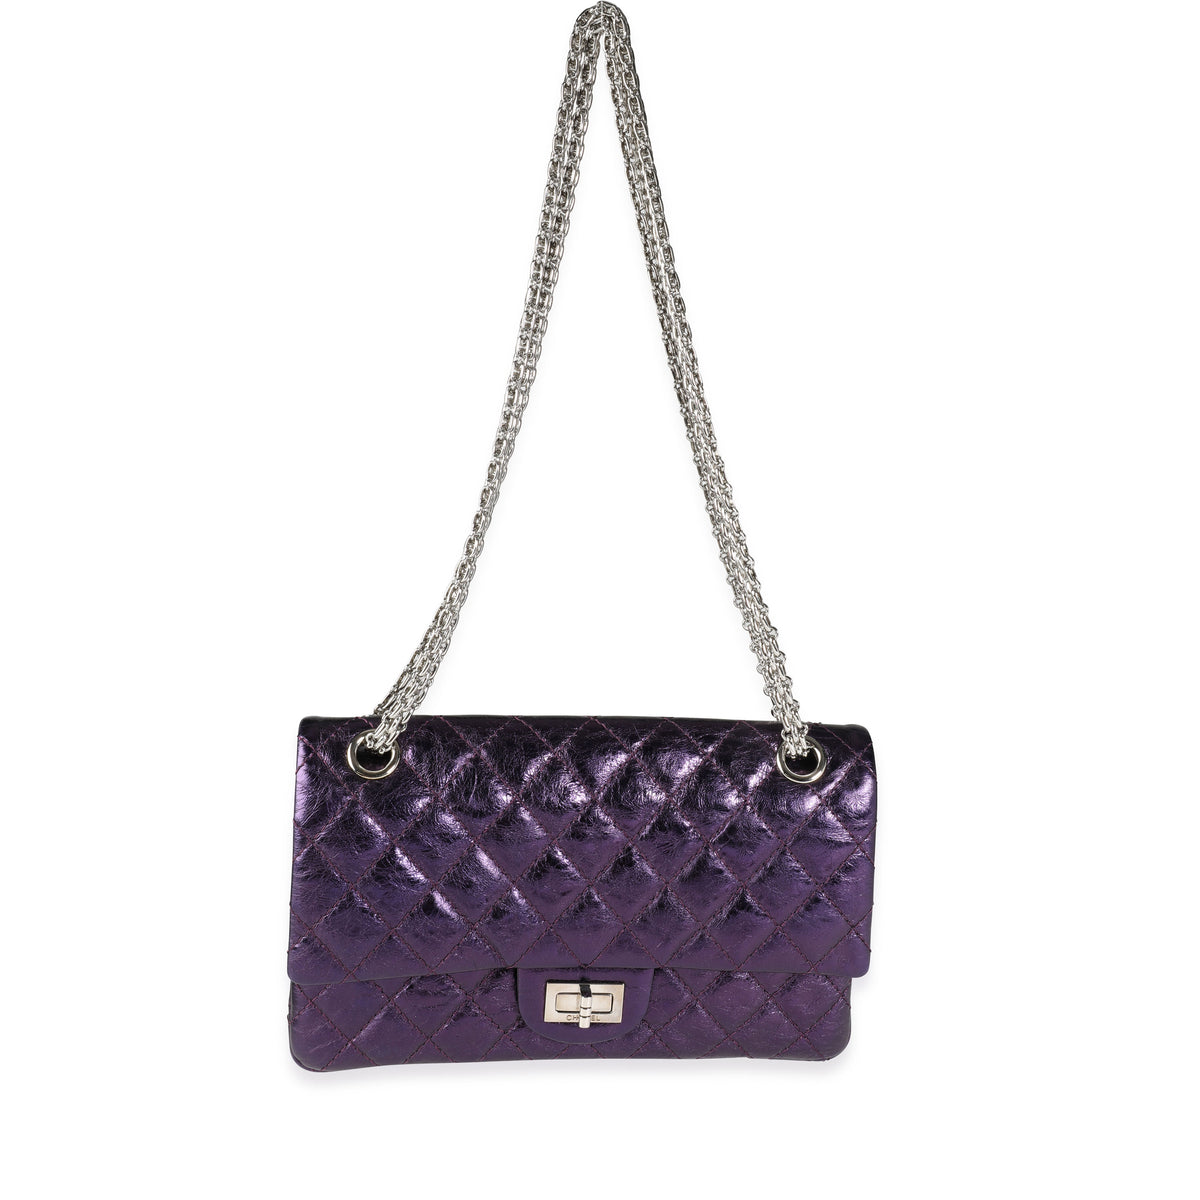 Chanel Metallic Purple Quilted Aged Calfskin Reissue 2.55 225 Double Flap  Bag